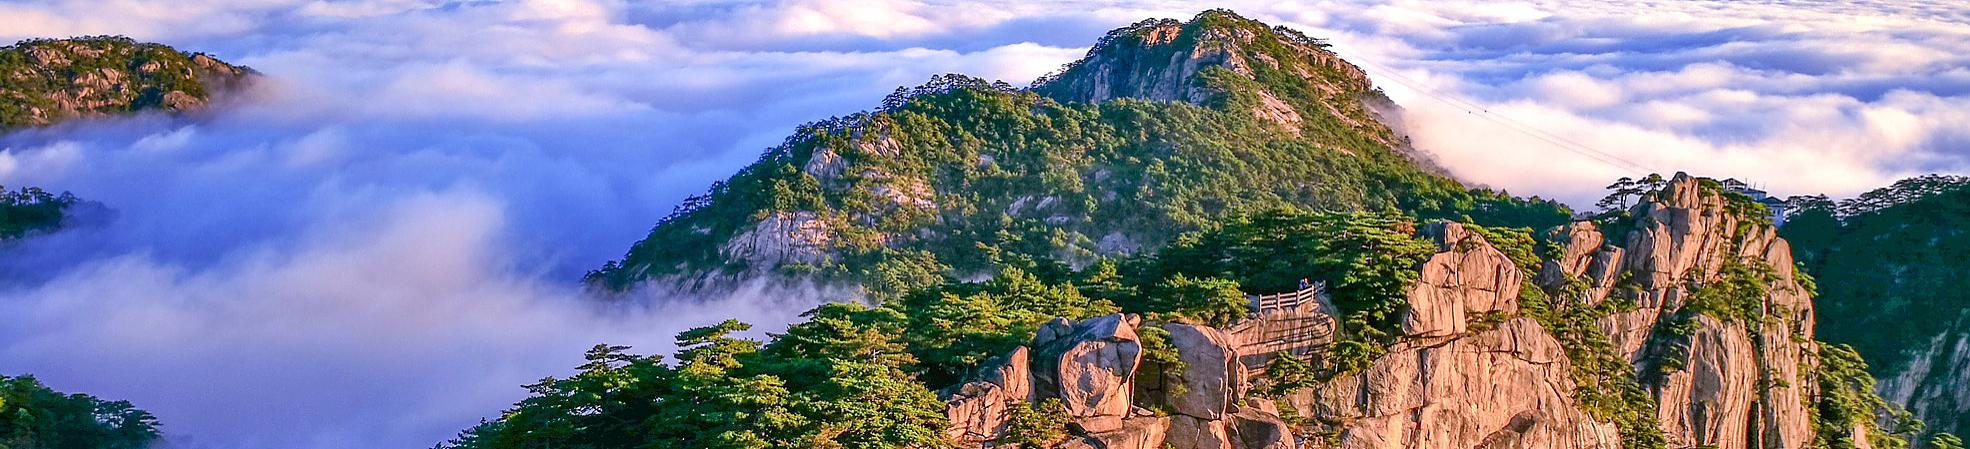 North Sea Scenic Zone of Mt.Huangshan 